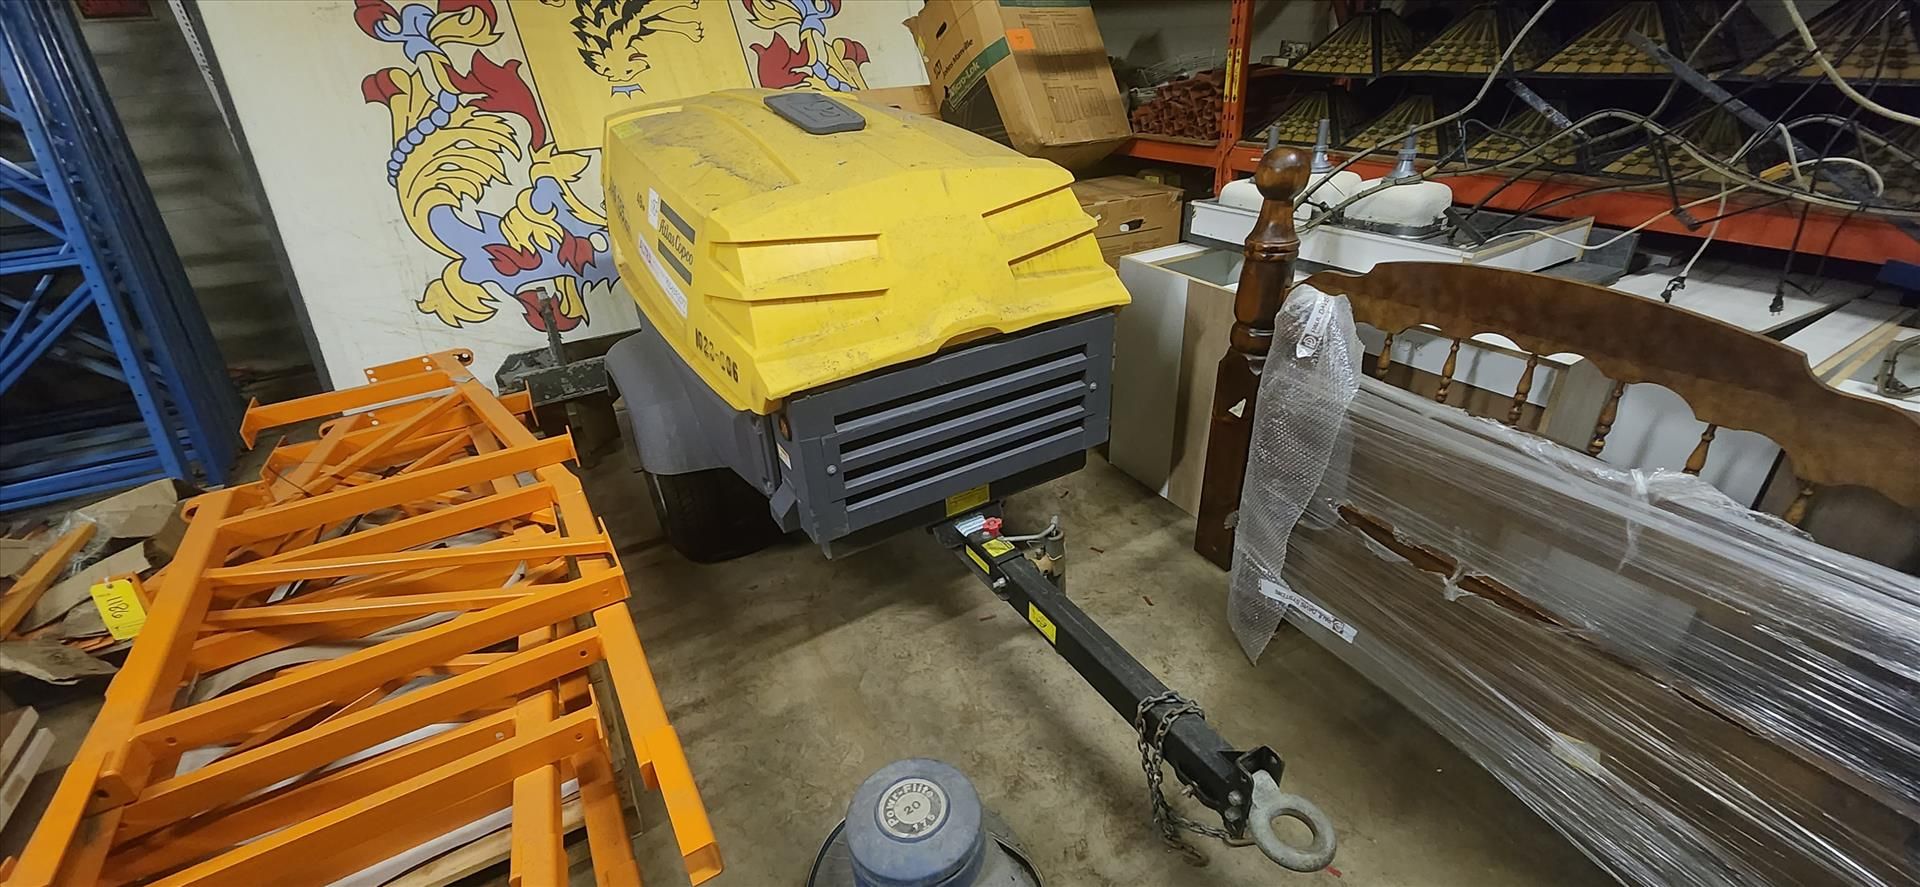 AtlasCopco air compressor, mod. XAS185KD7, 49 hp, towable [TAG 1187 - LOC Zelco Dr.] - Image 2 of 5